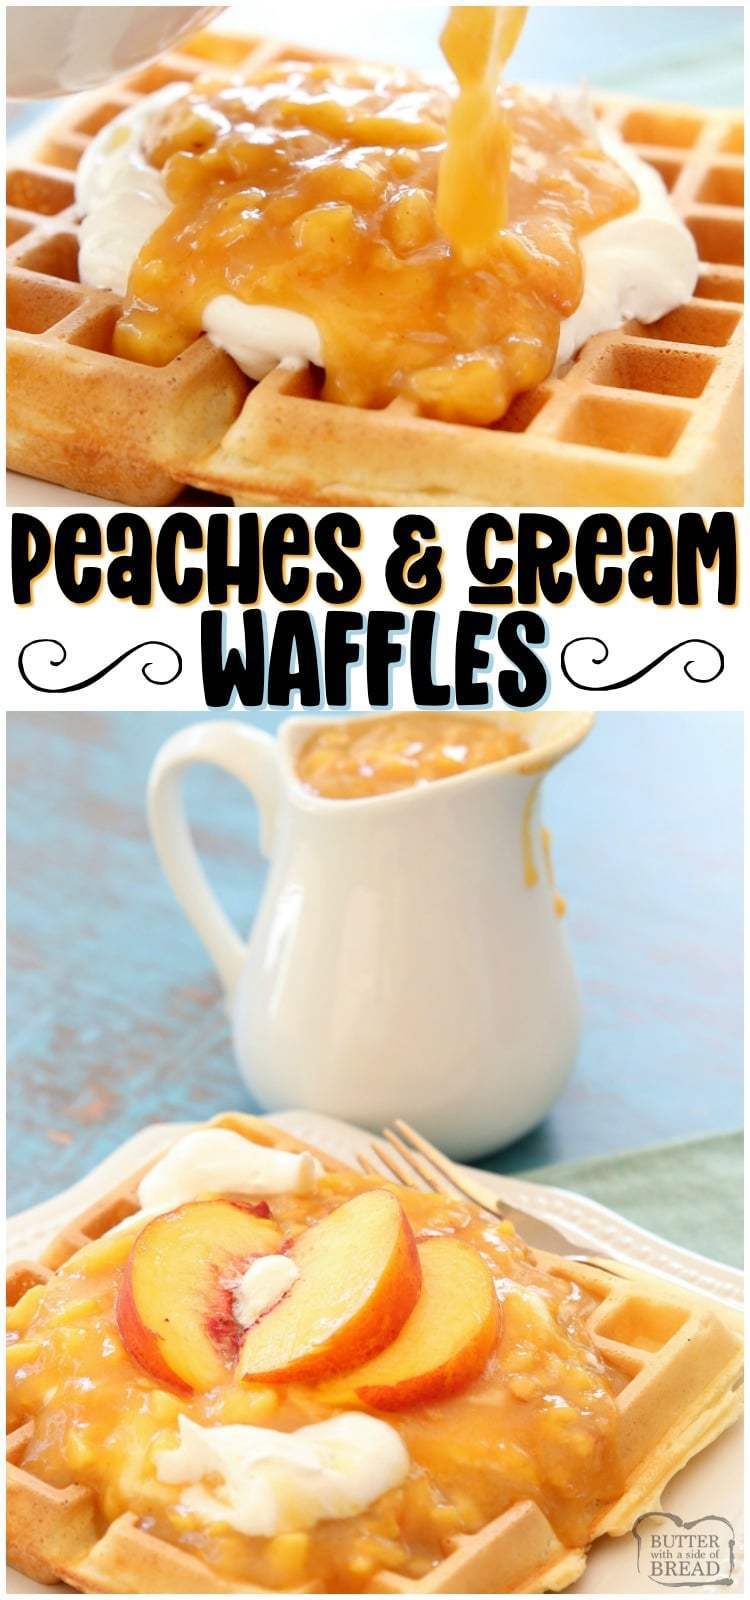 Peaches and Cream Waffles made with a crispy Belgian waffle recipe topped with a simple homemade chunky peach syrup and sweet cream. Perfect waffle recipe for special occasions and brunch! #waffles #peaches #breakfast #peachesandcream #recipe from BUTTER WITH A SIDE OF BREAD